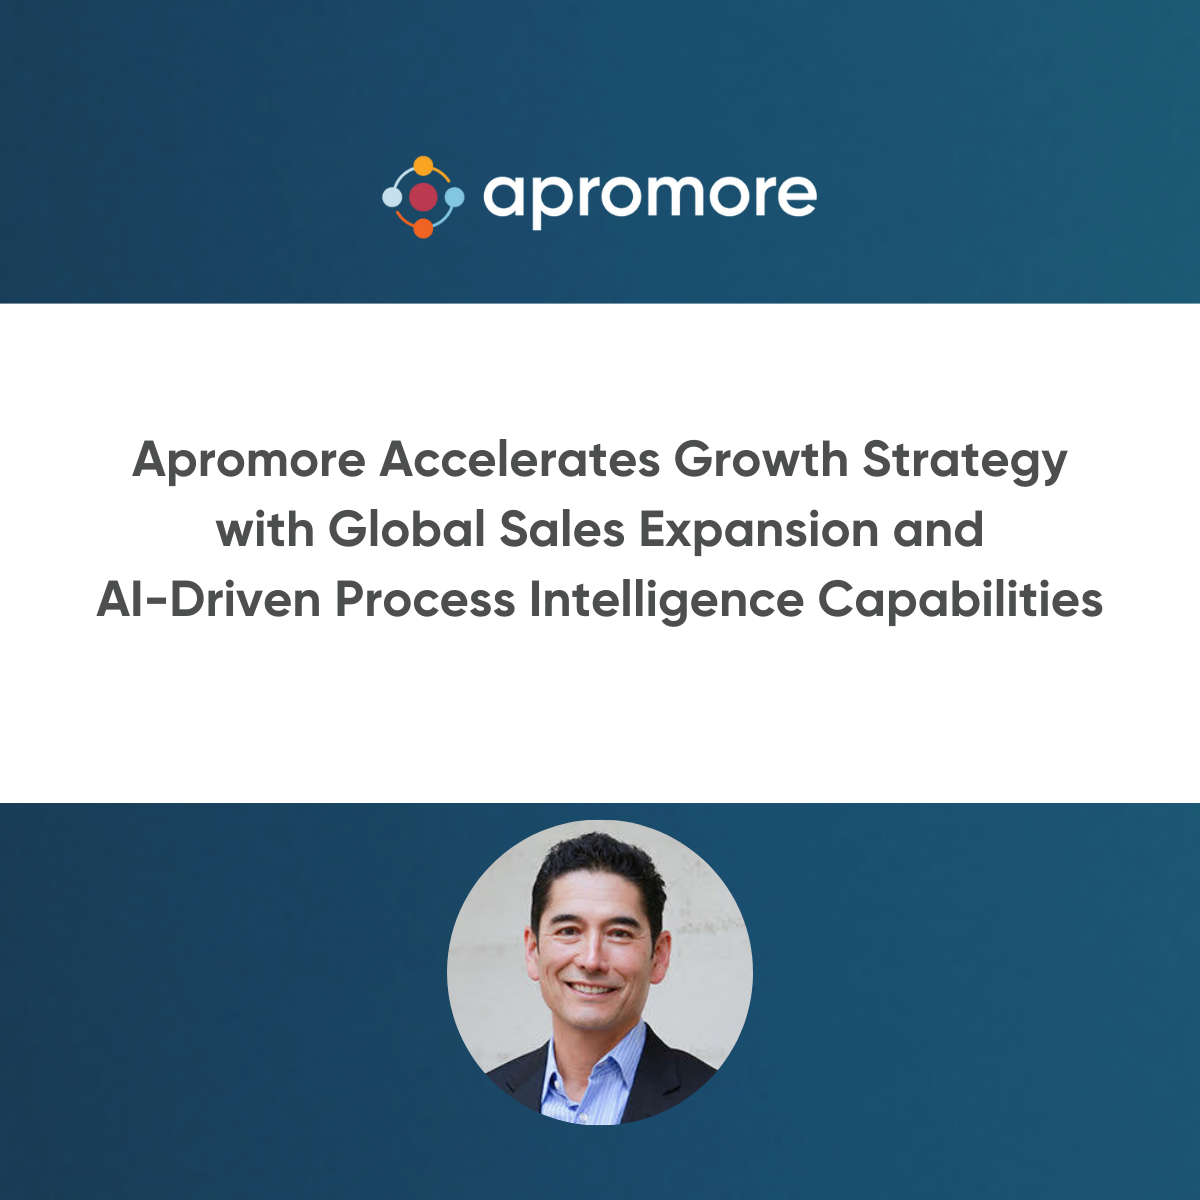 Apromore Accelerates Growth Strategy